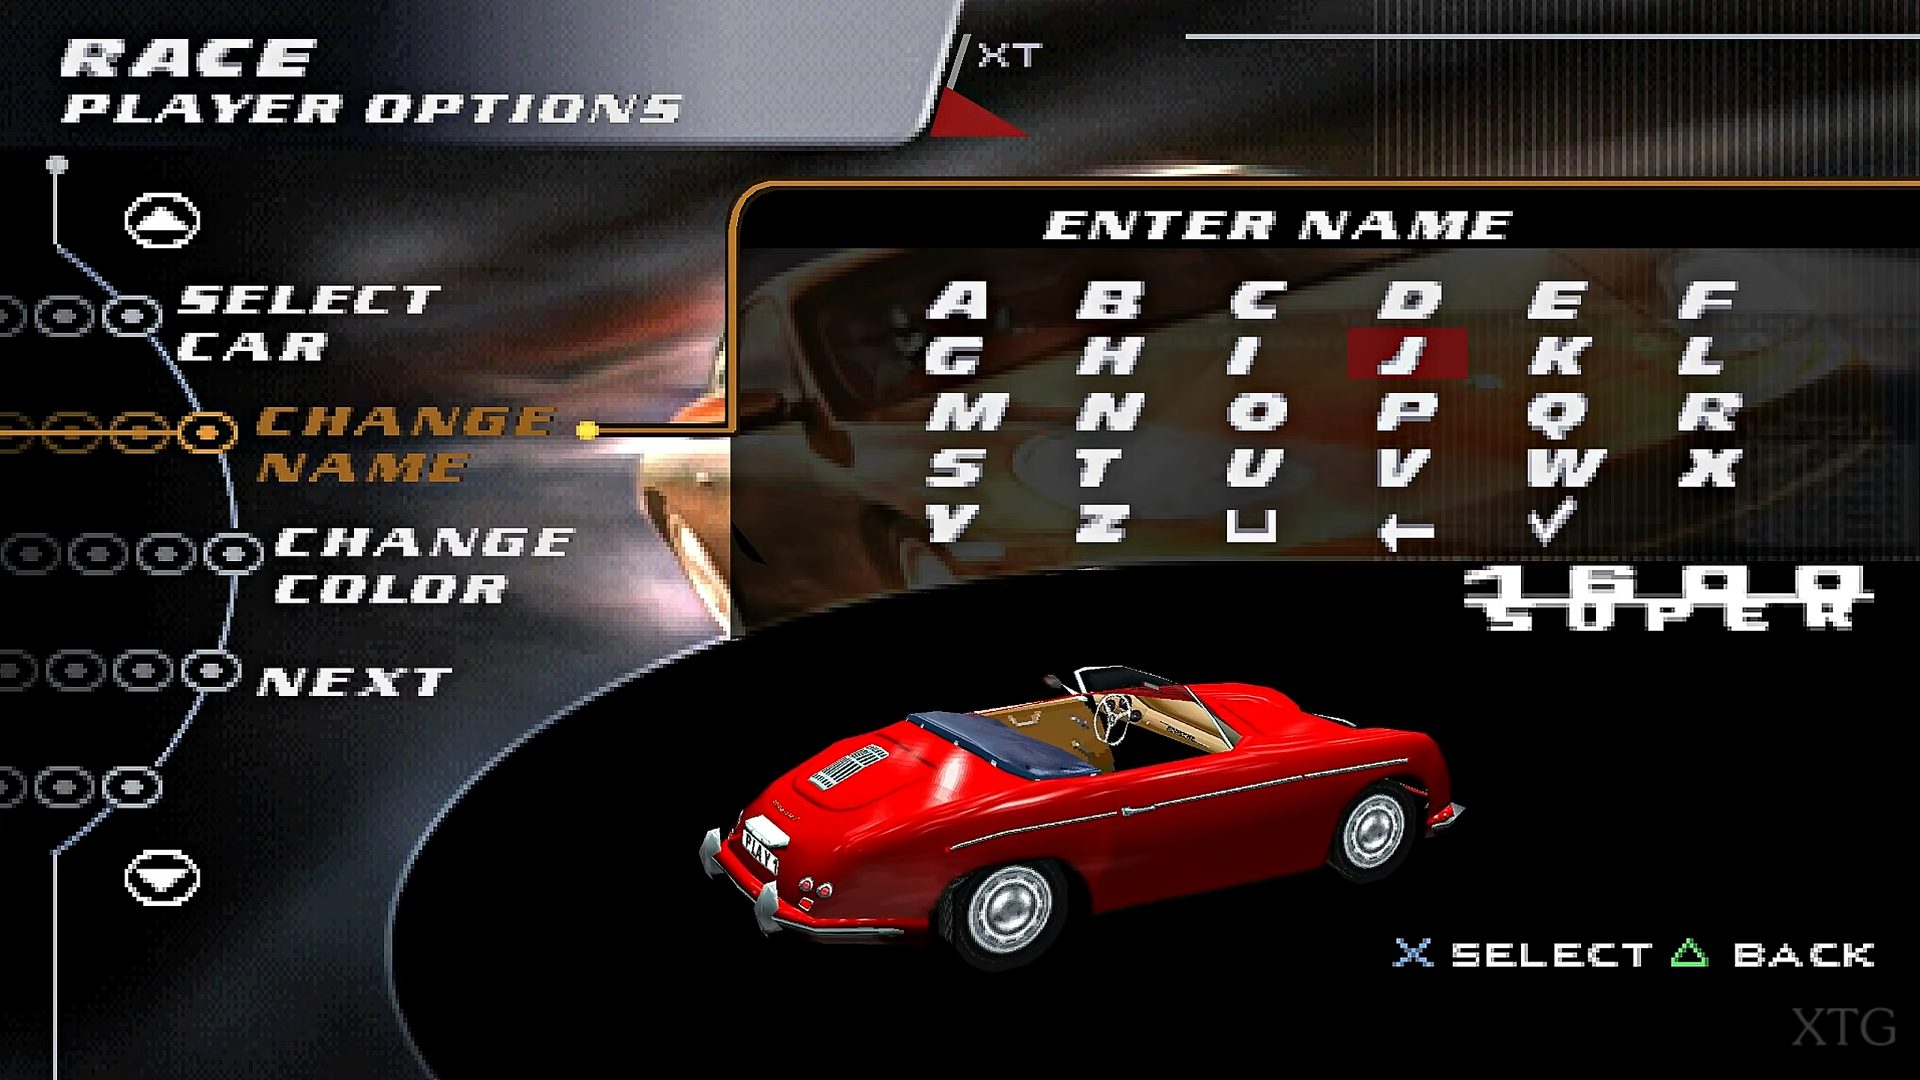 Road & Track Presents: The Need for Speed (USA, Europe) 3DO ISO - CDRomance